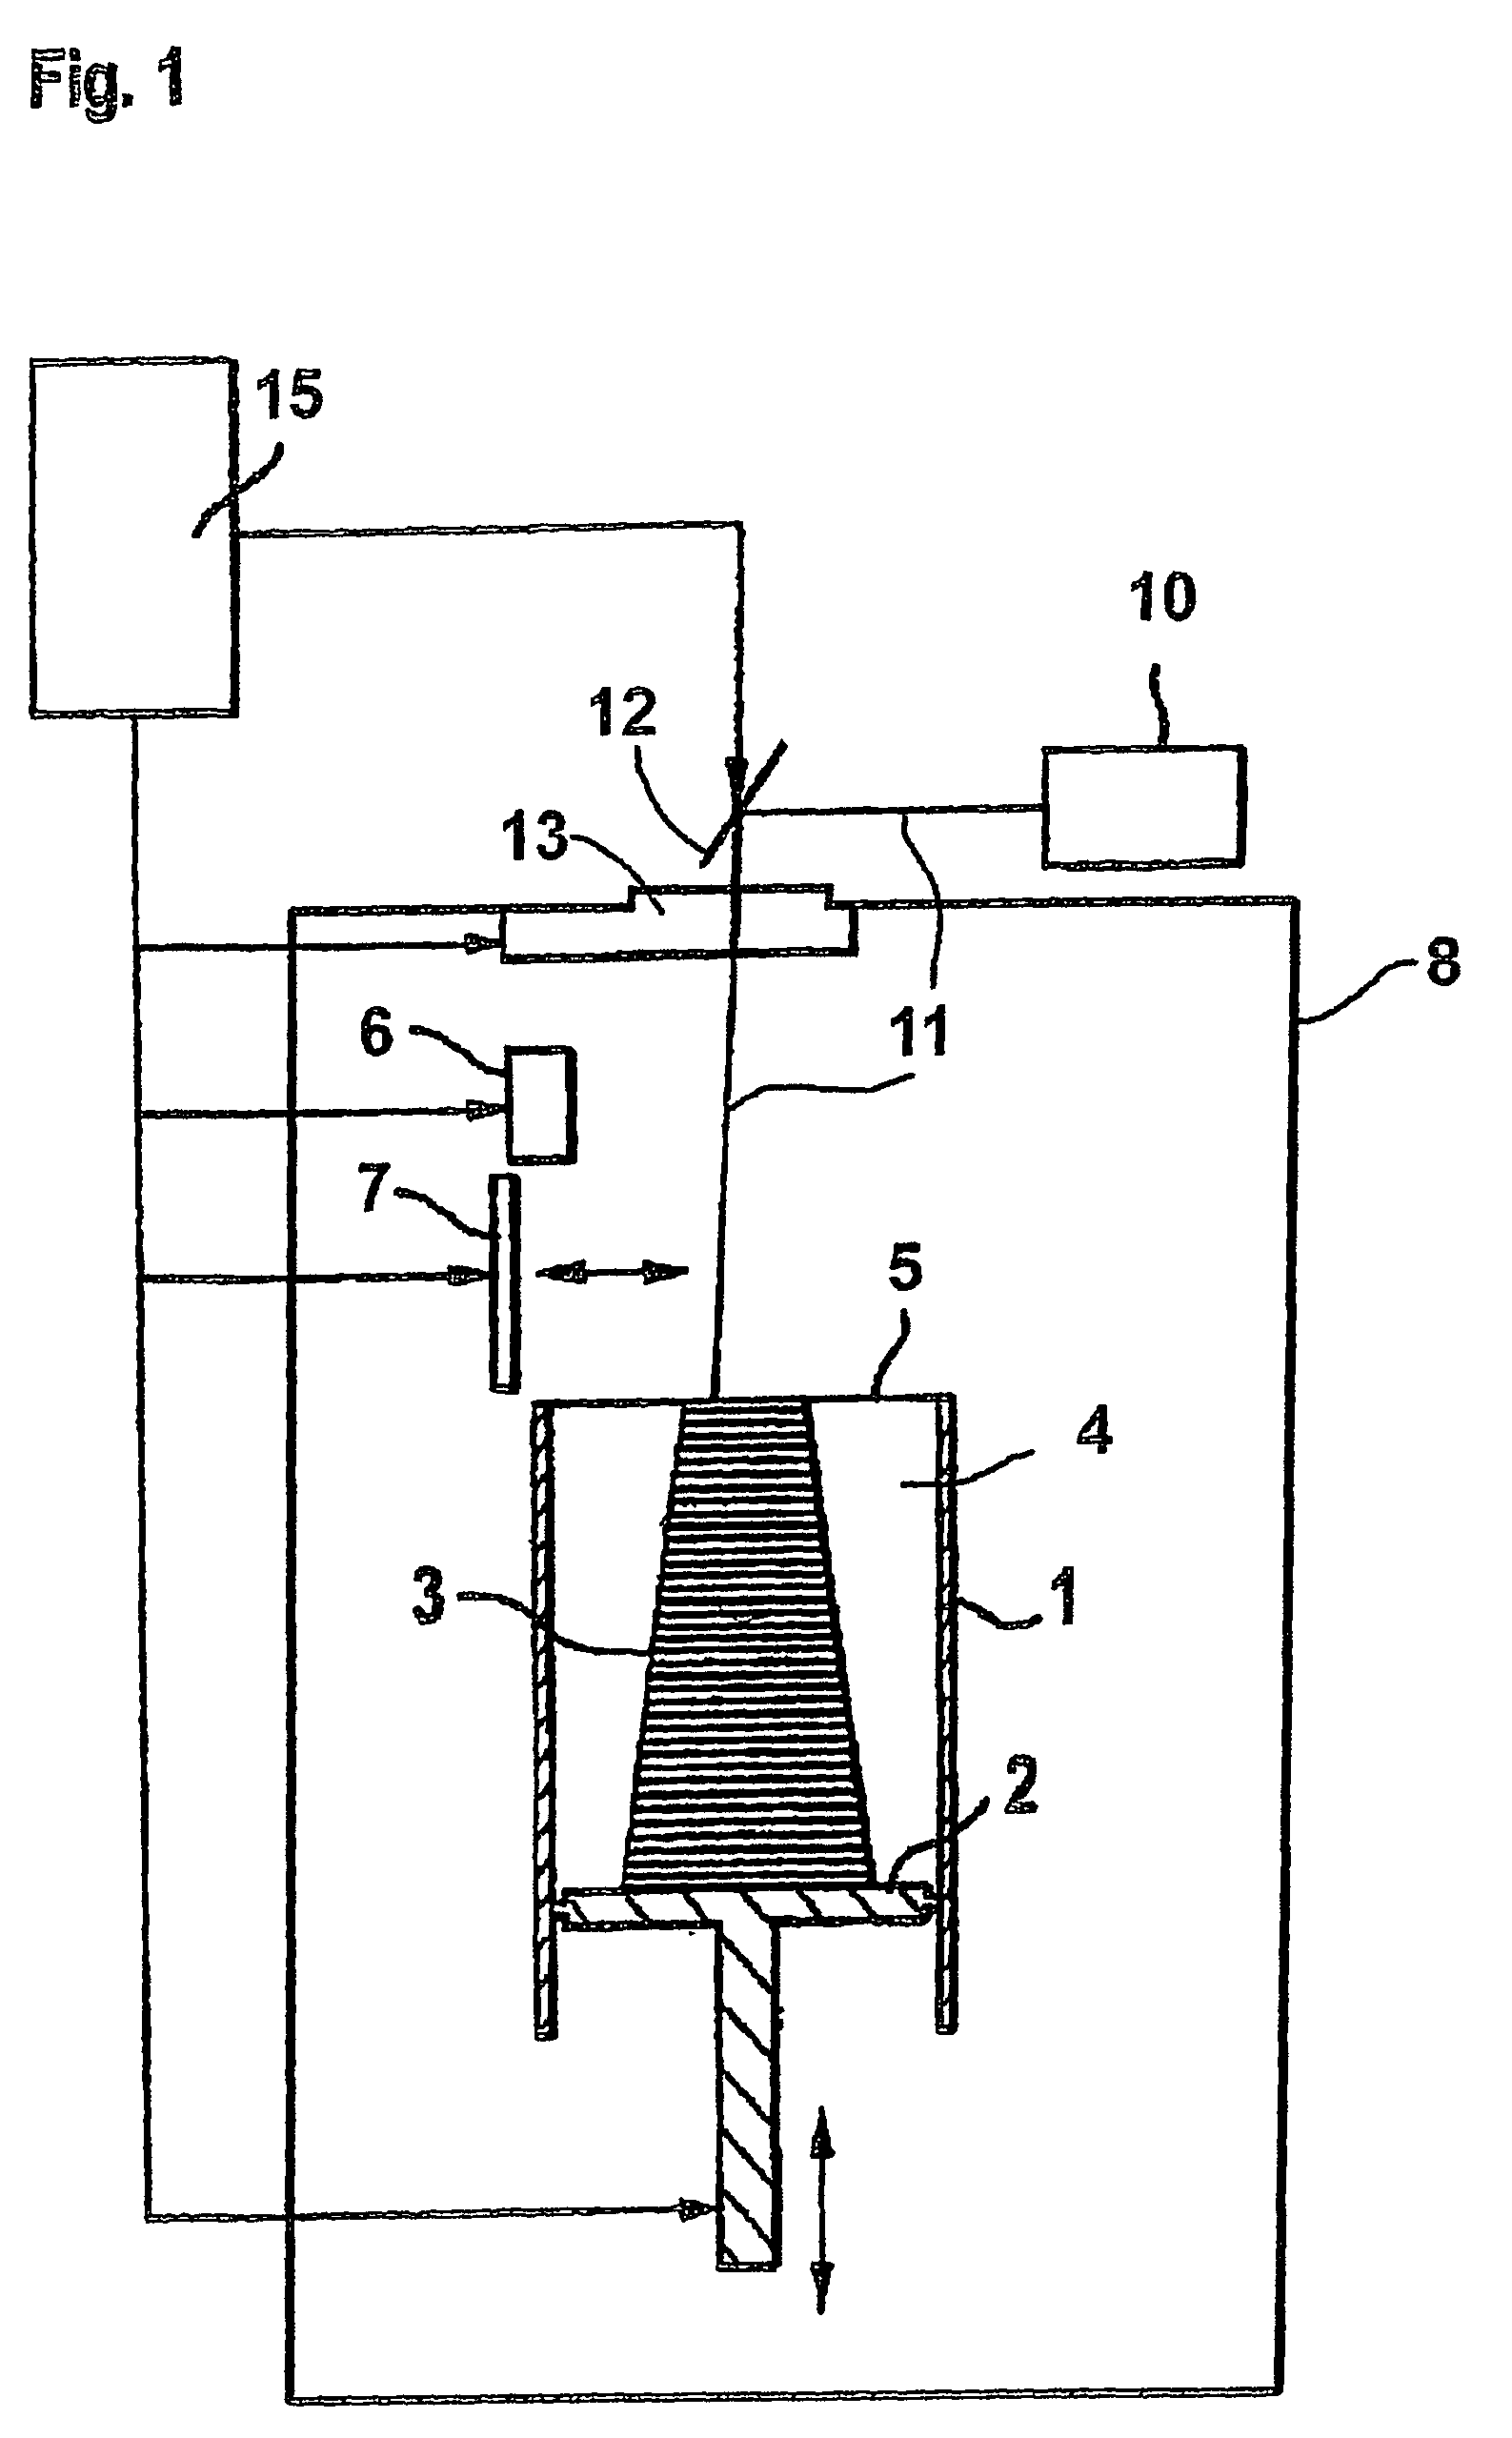 Apparatus for manufacturing a three-dimensional object layer by layer